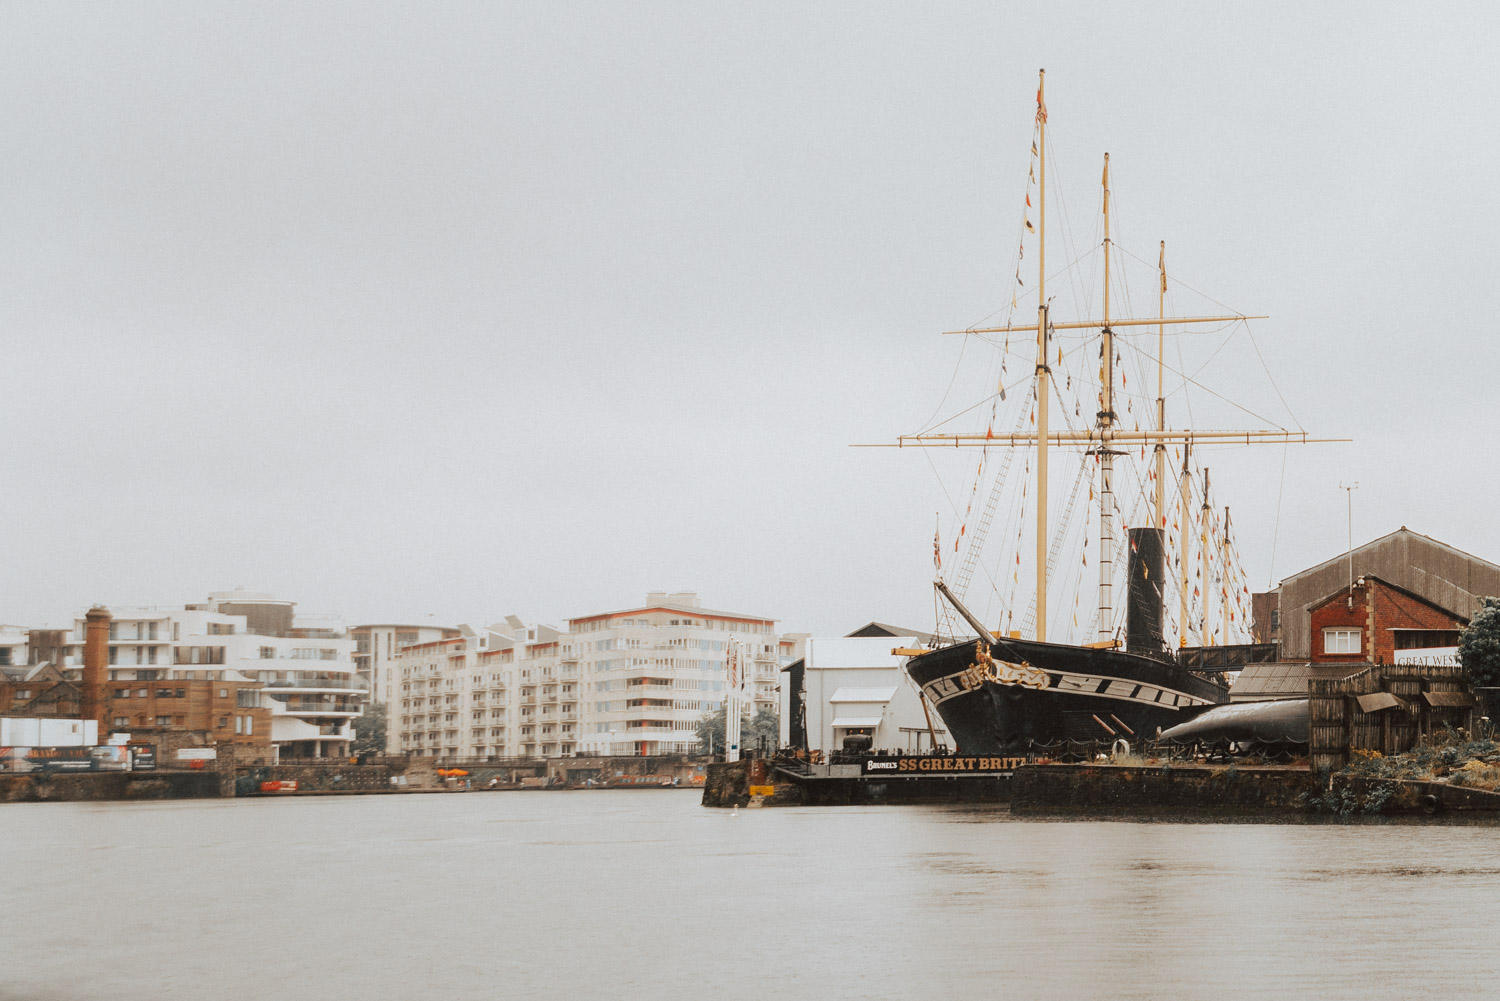 Things to do in Bristol, UK | Visit Brunel' SS Great Britain | A Quick Guide to Bristol